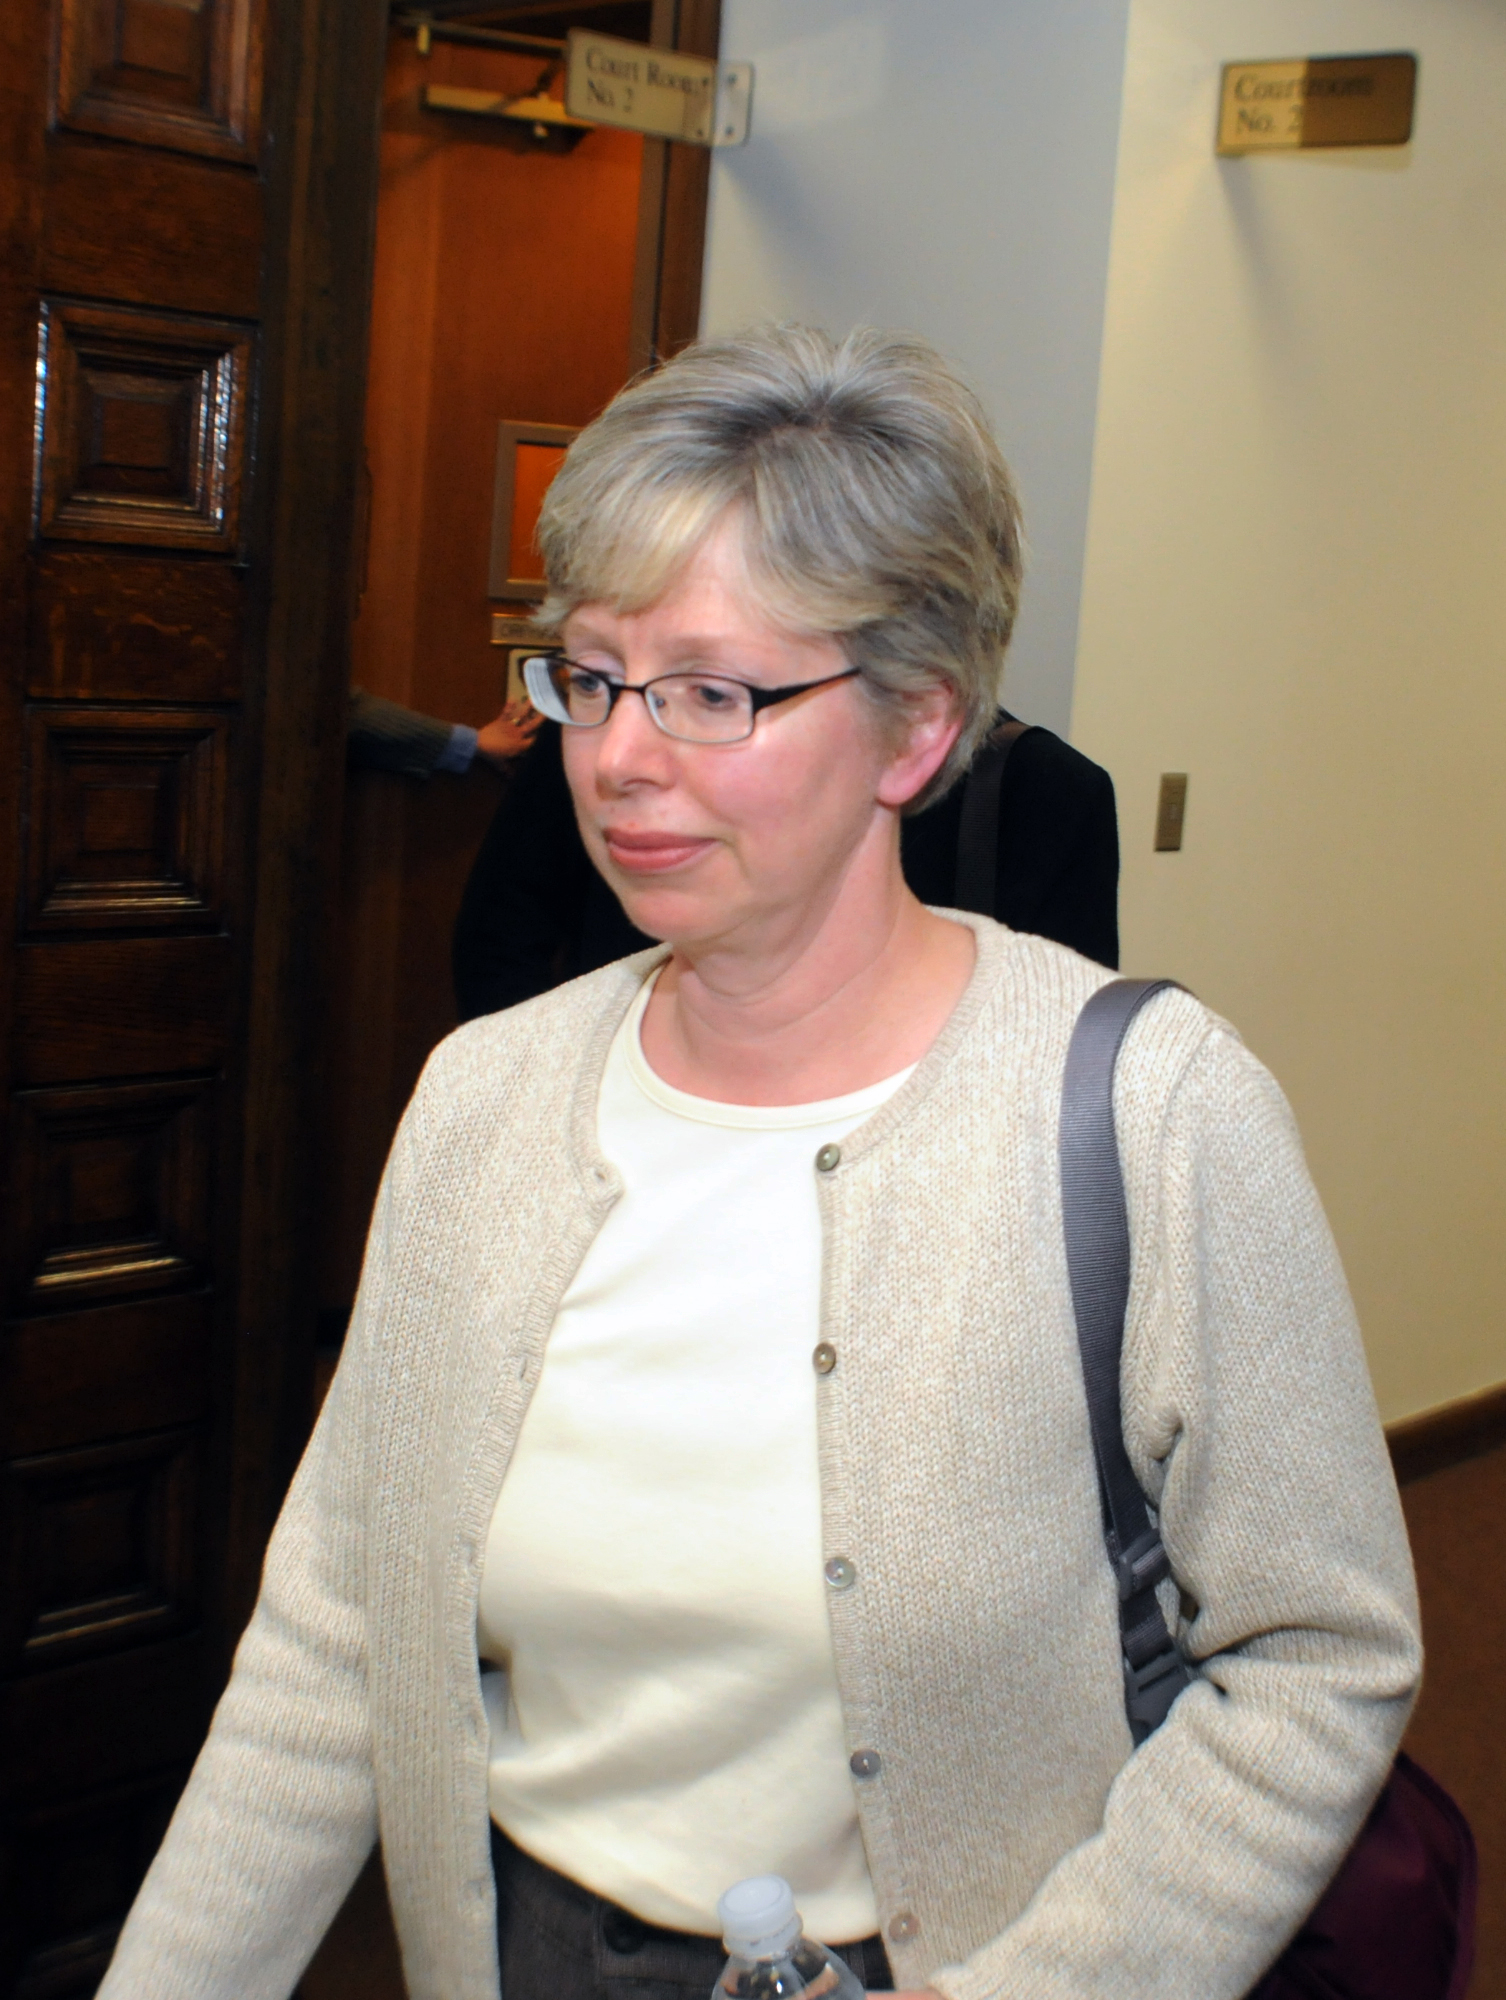 PHOTO: Barbara J. Mancini of Philadelphia exits the courtroom following her assisted suicide hearing in Pottsville, Pa. on Oct. 10, 2013.